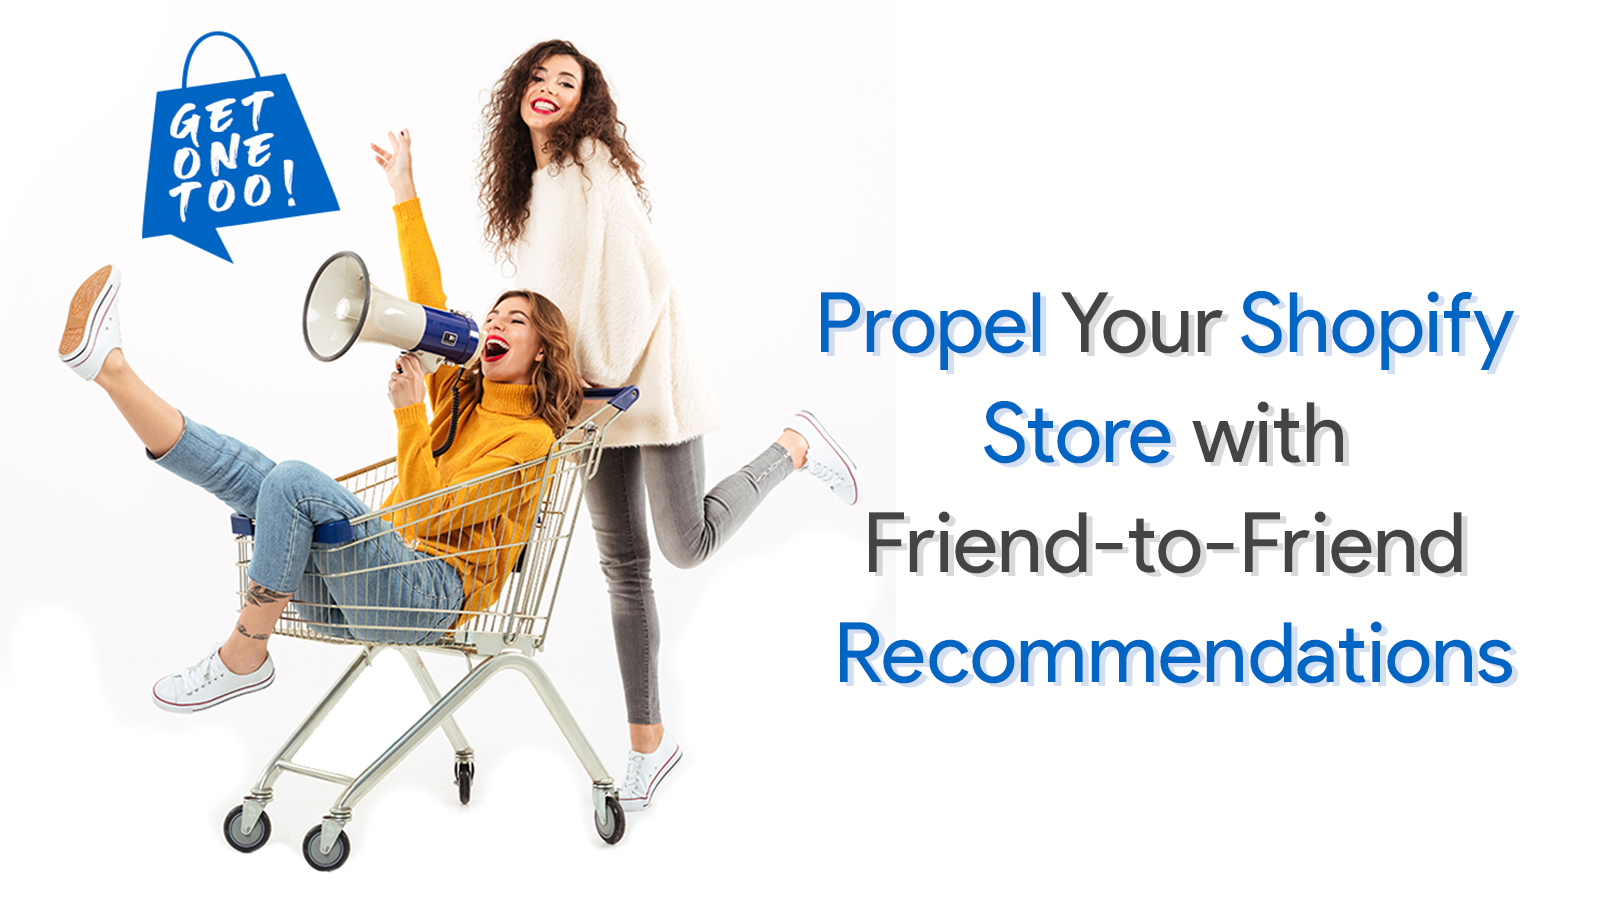 Propel Your Shopify Store with Friend-to-Friend Referrals